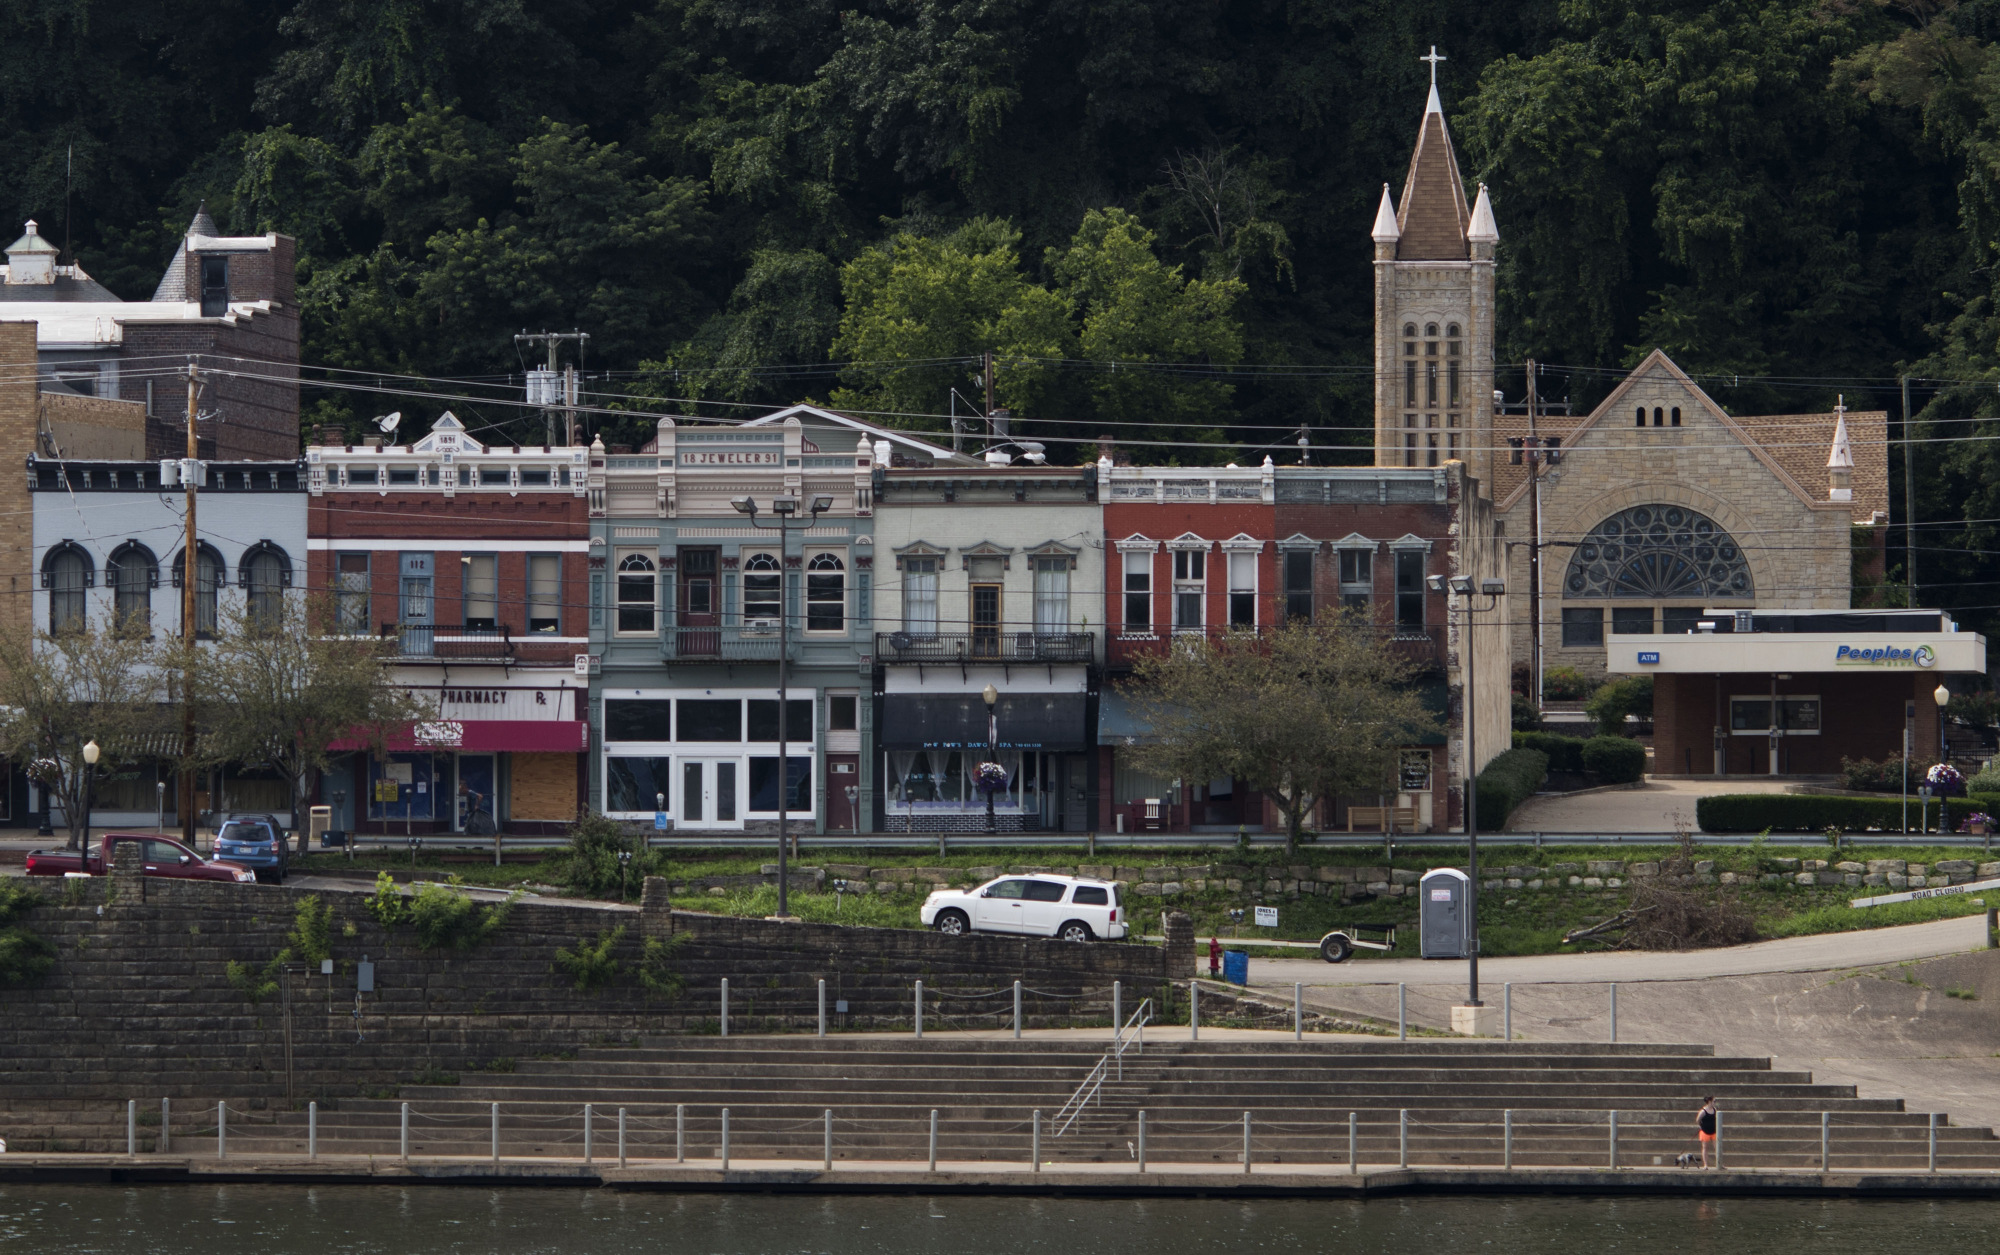 The Ohio River stands in front of businesses in Pomeroy, Ohio.&nbsp;